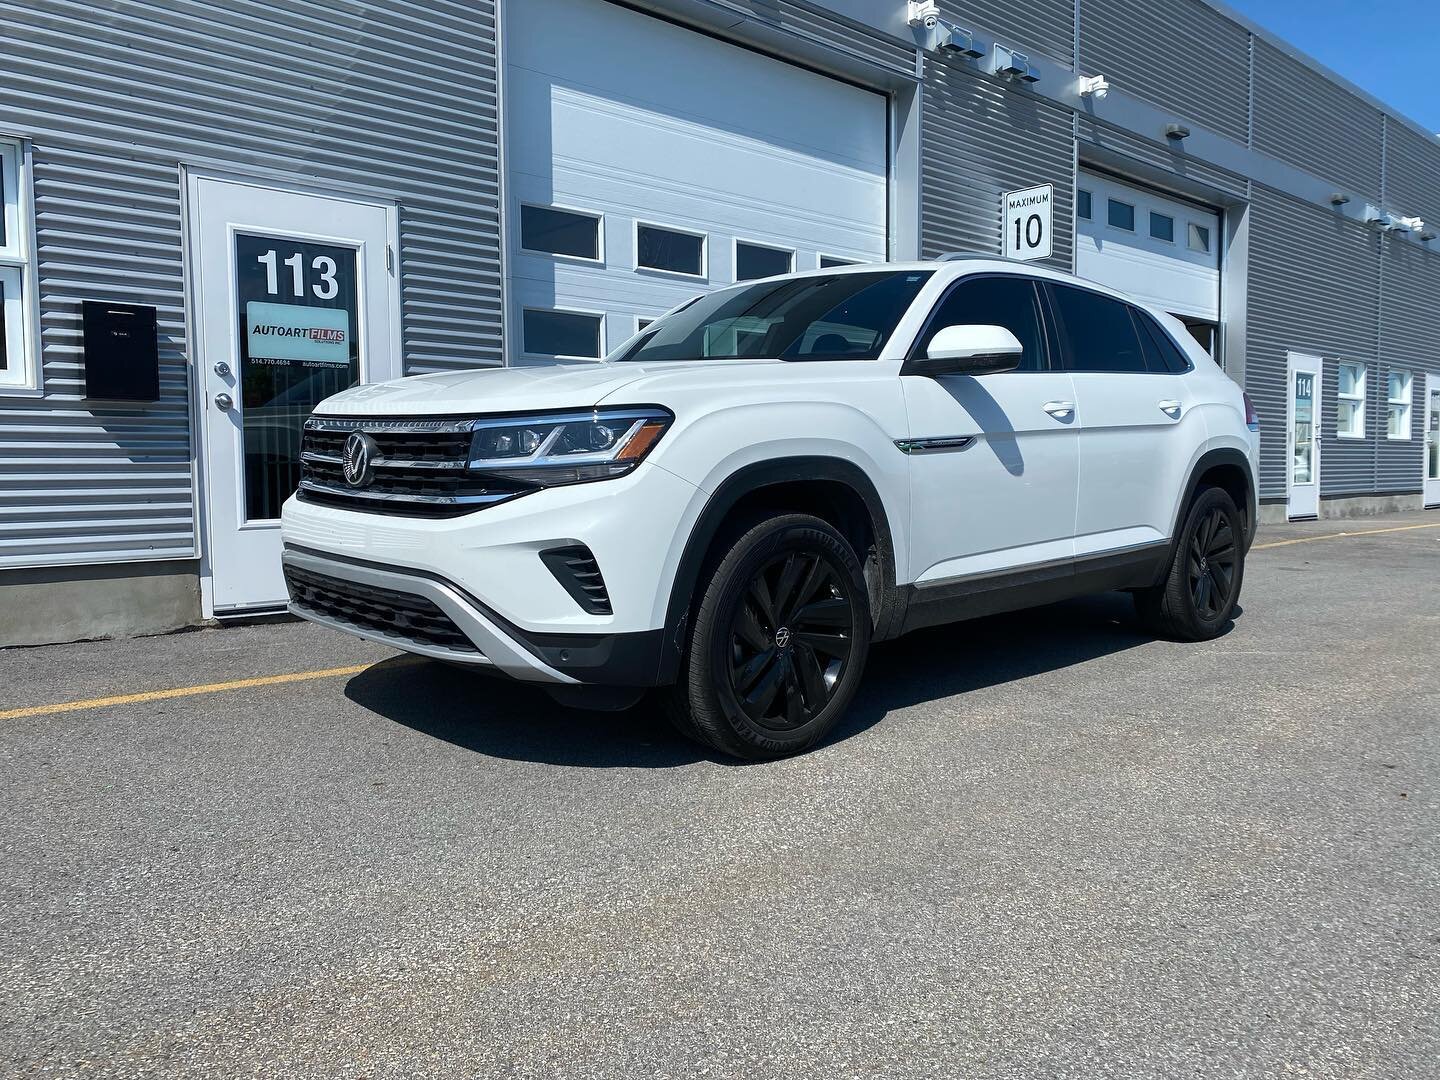 🌟 Elevate Your Journey 🌟
The Volkswagen Atlas now boasts a full front PPF for ultimate protection, while Ceramic Tints add a touch of cool sophistication to your ride. Explore with confidence! 😎 #AutoArtFilmsSolutions #CarLovers #ppf #ceramic #tin